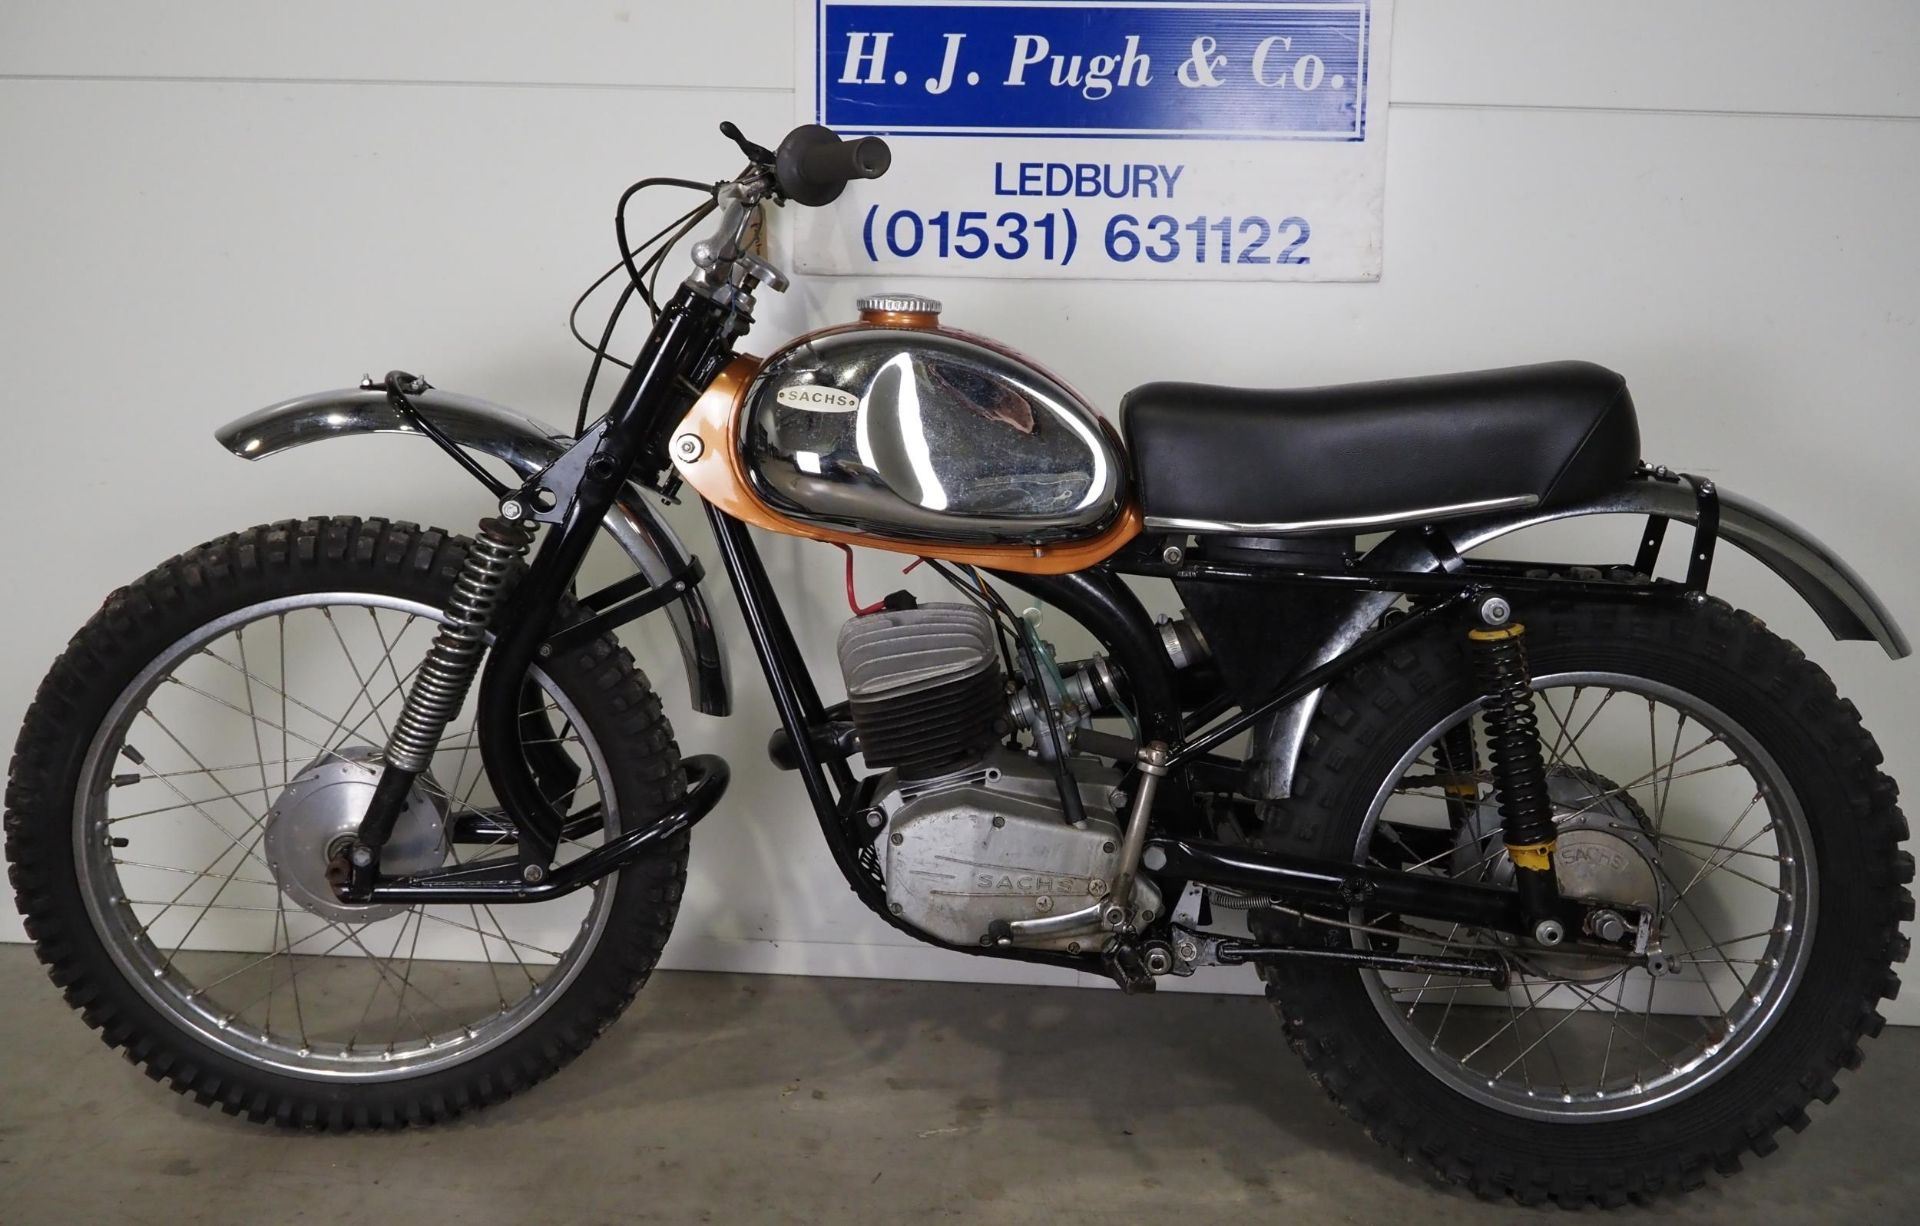 Sachs type 427 motocross bike. 1970. Frame No. 427-003950 Engine No. 57636666 Runs but requires - Image 7 of 7